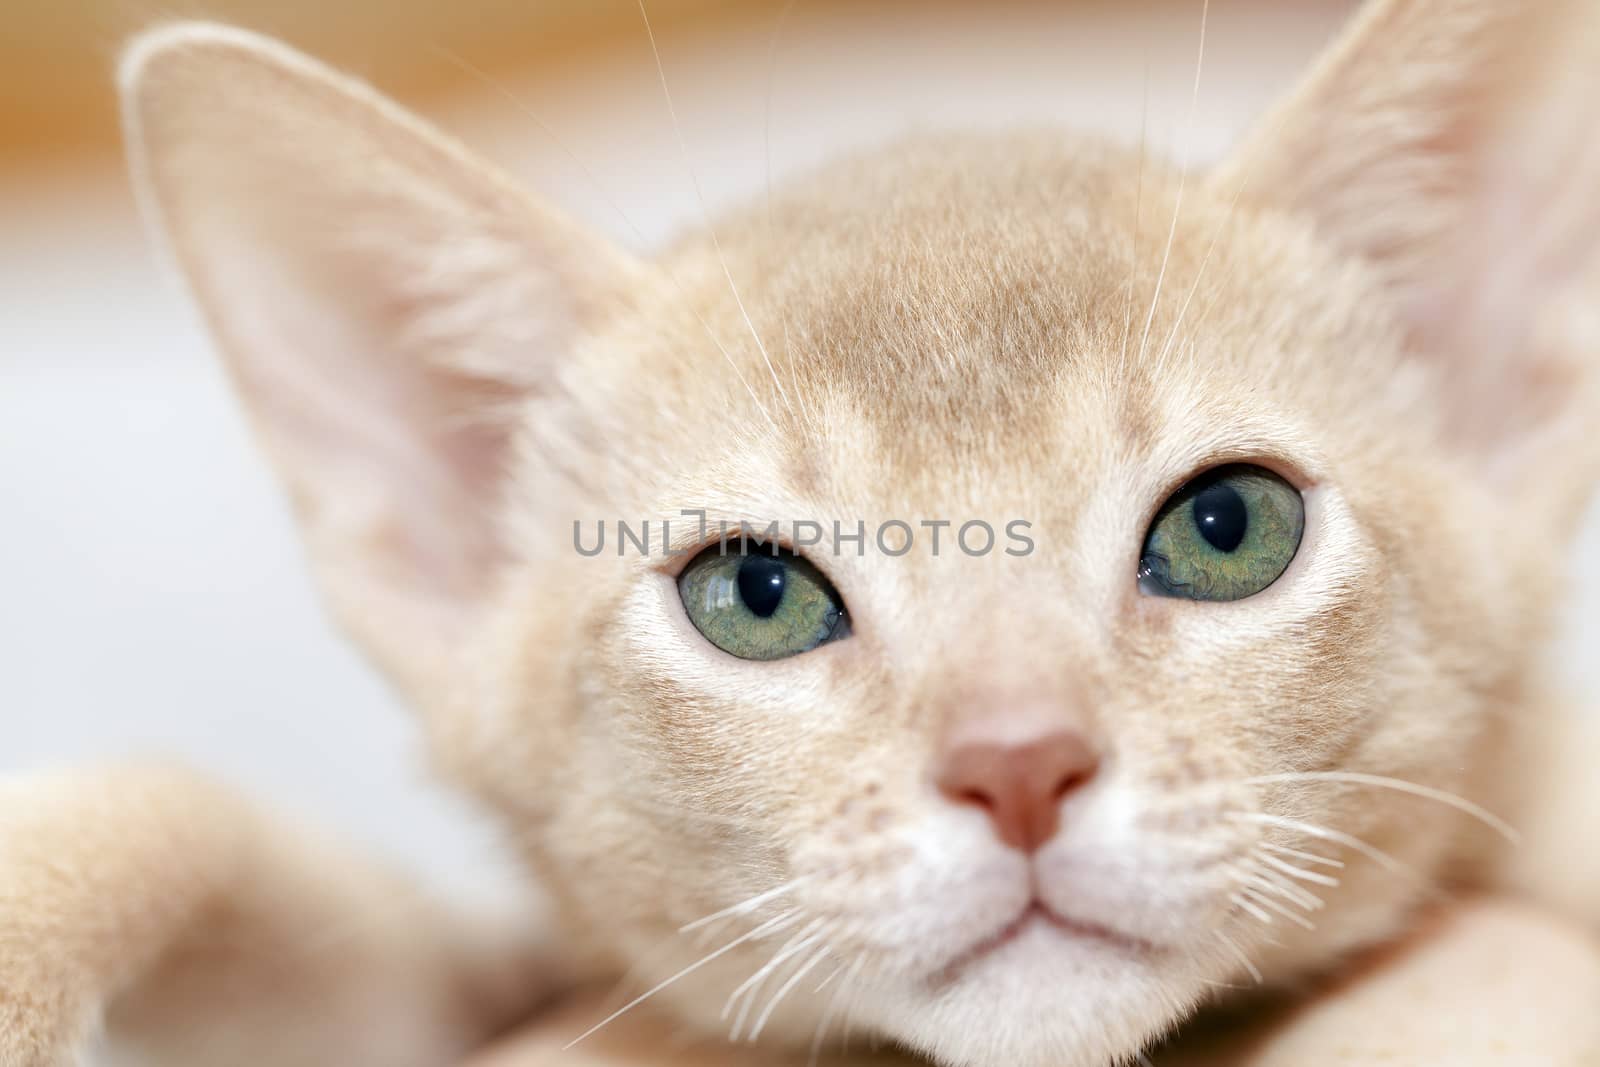   photographed close-up head of the Abyssinian kitten. color fawn